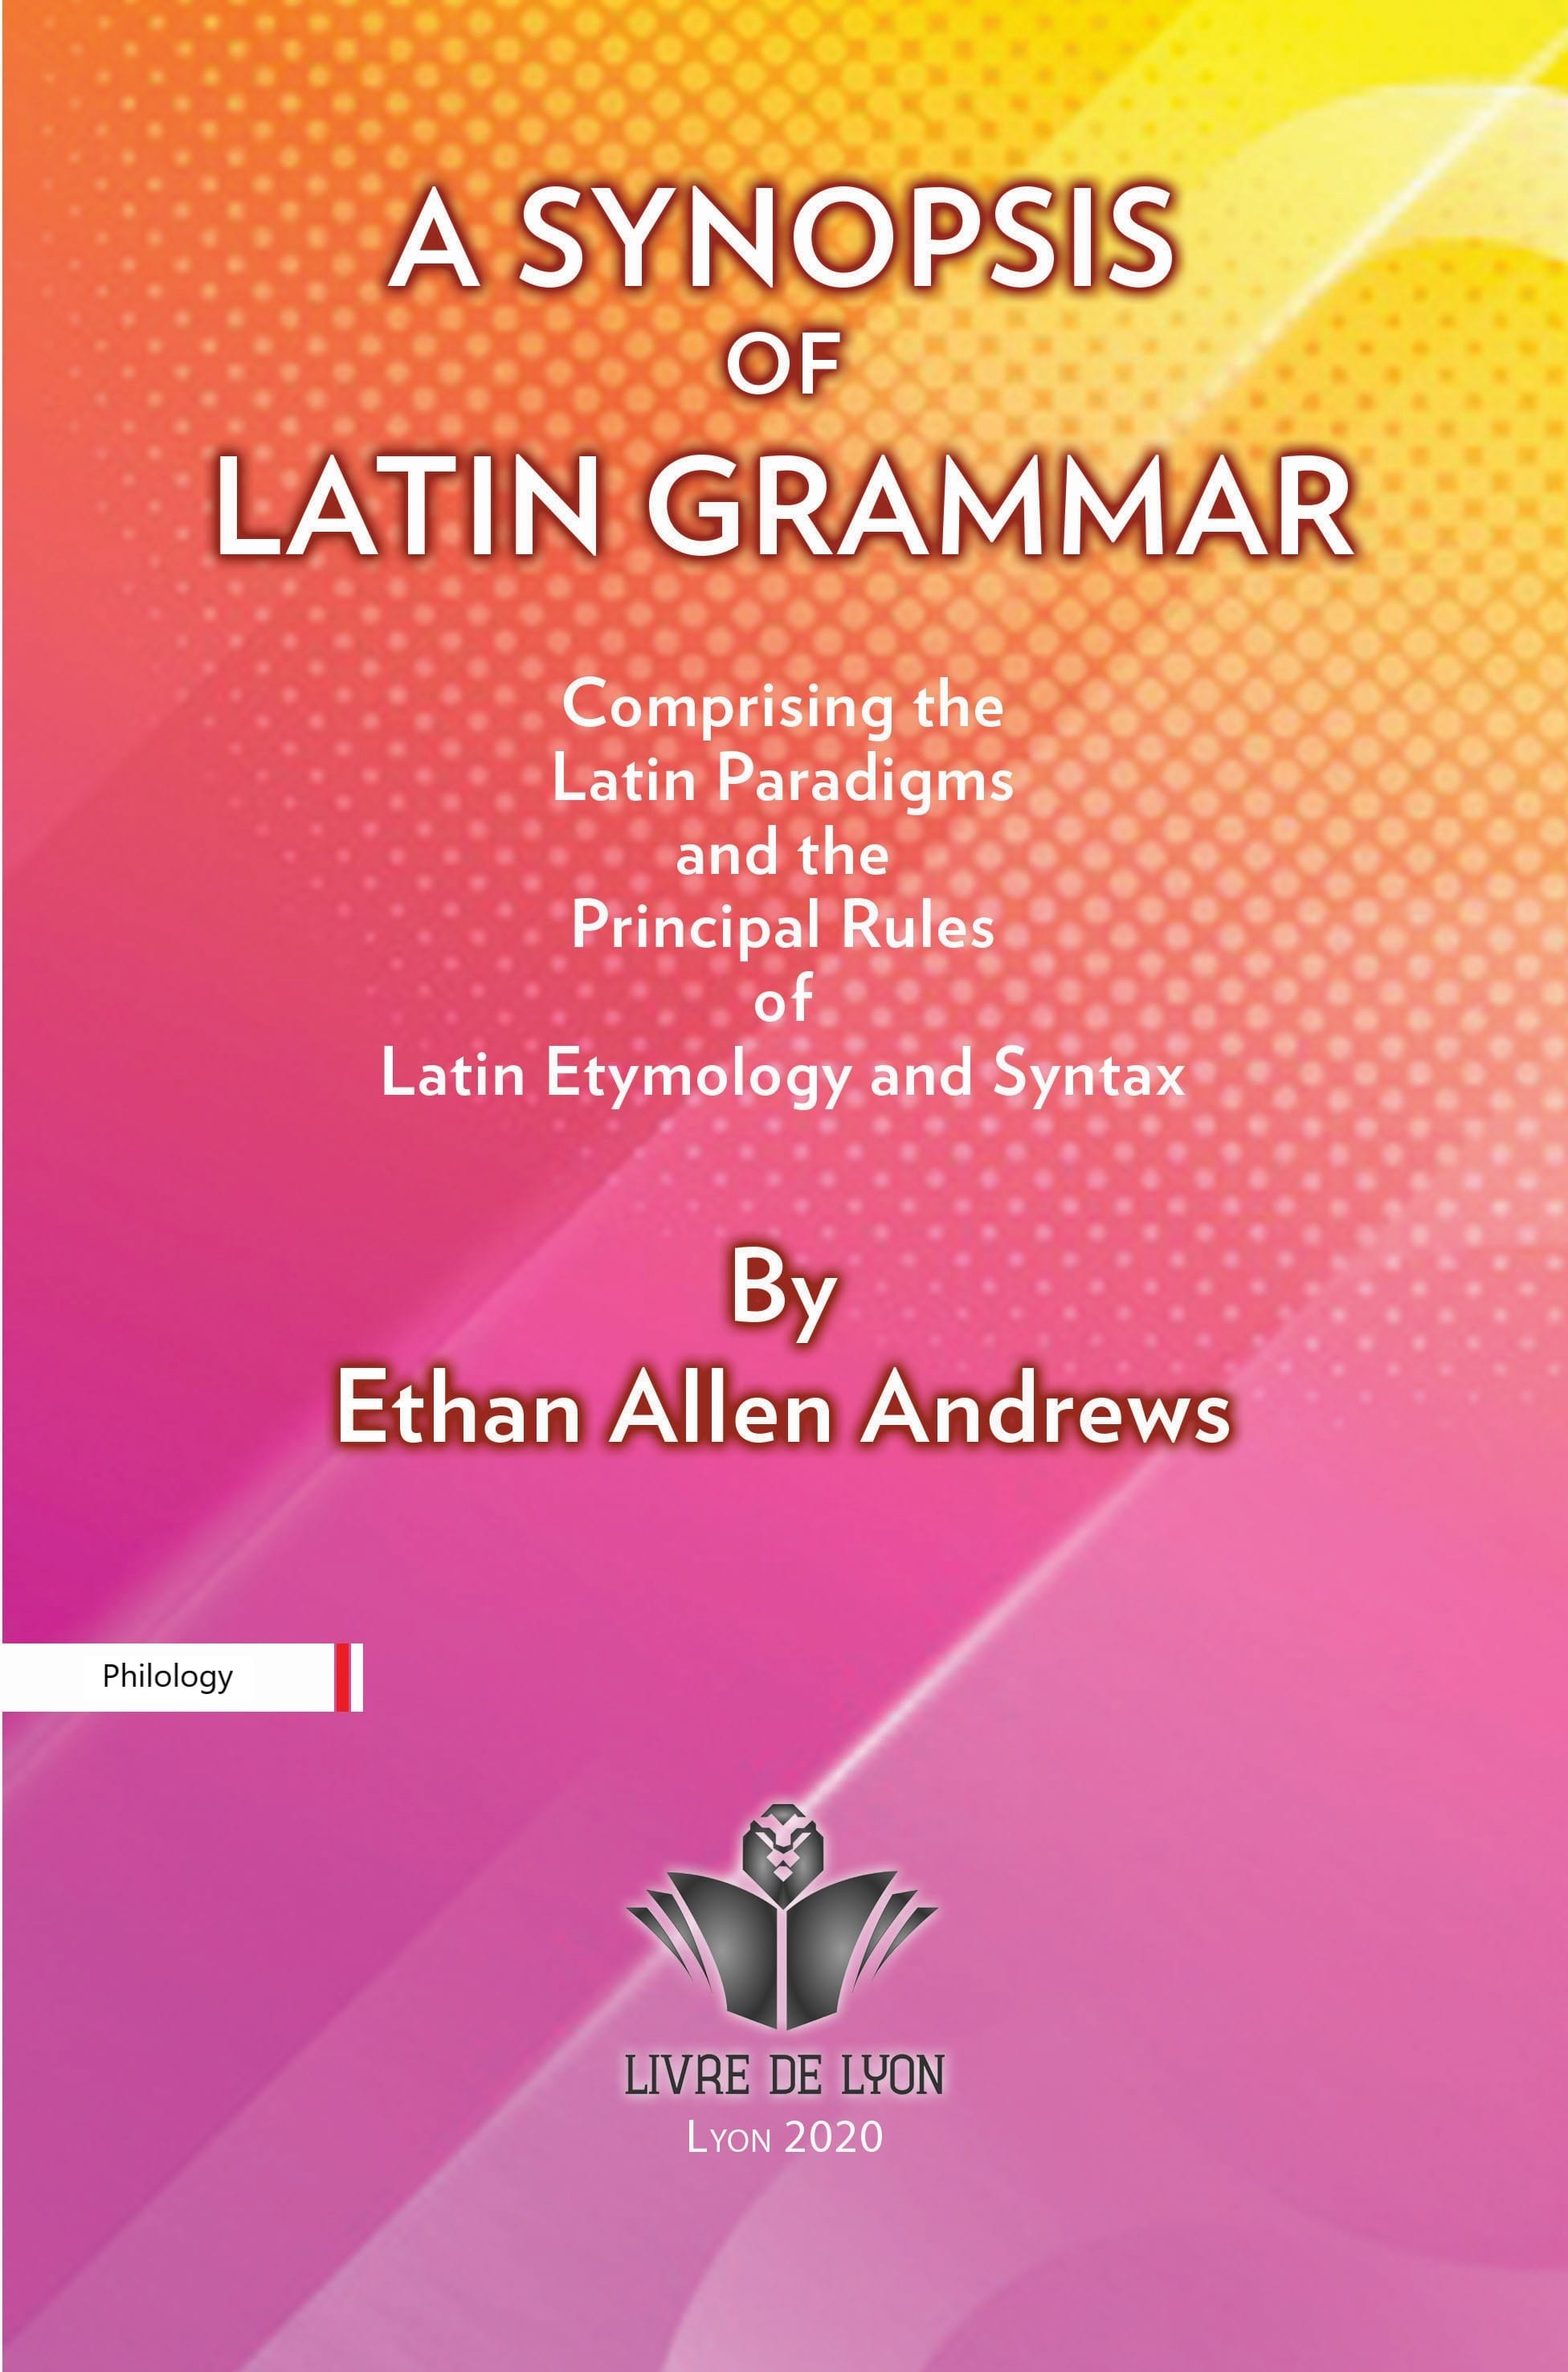 A Synopsis of Latin Grammar: Comprising the Latin Paradigms, and the Principal Rules of Latin Etymol